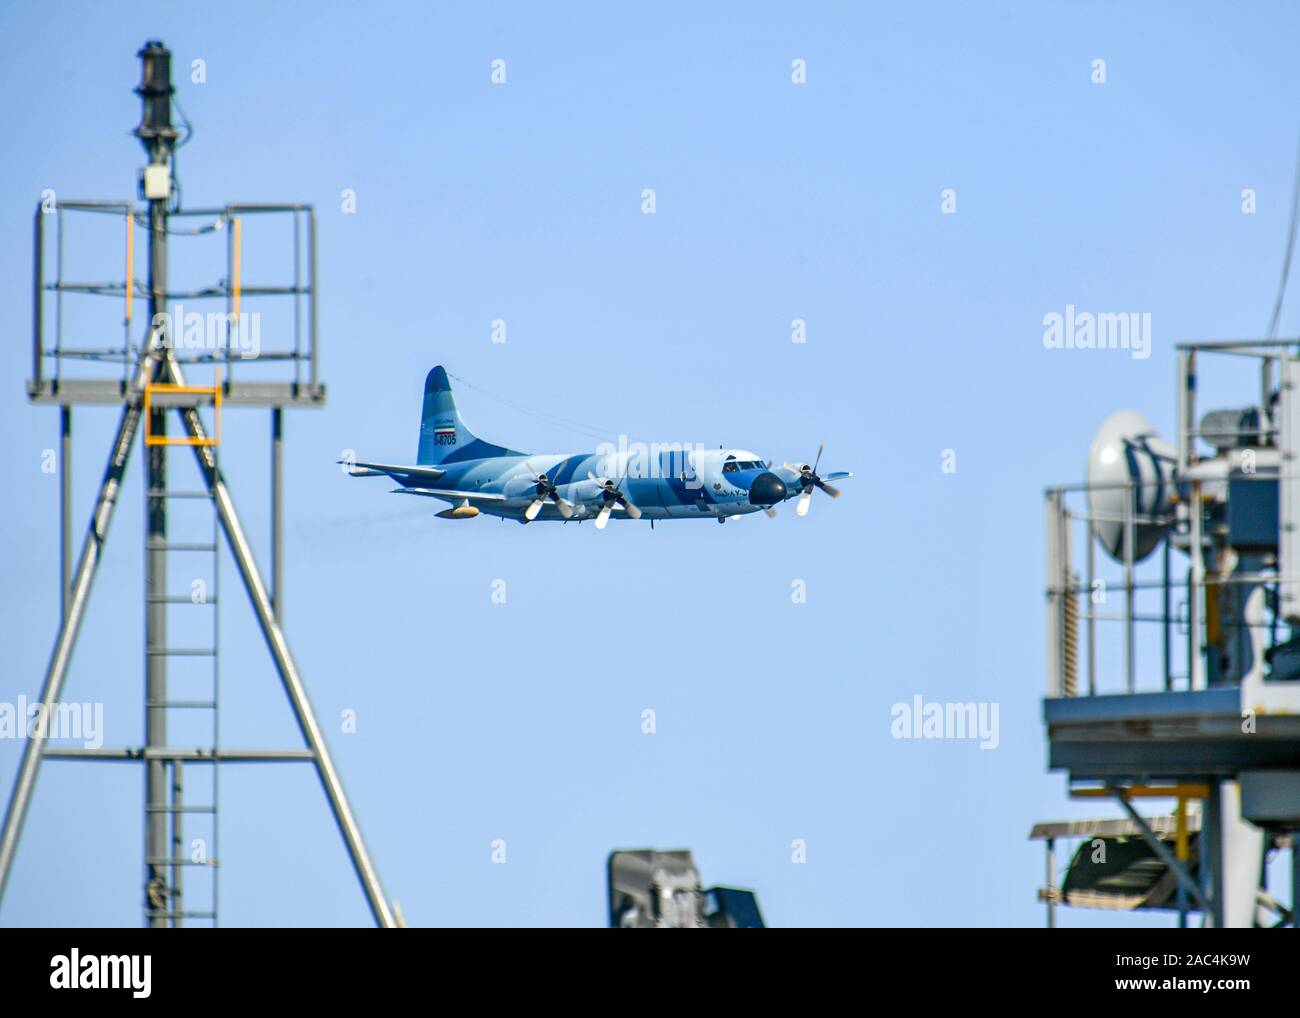 191111-N-PC620-0279 GULF OF OMAN (Nov. 11, 2019) An Iranian P-3C Orion aircraft flies by the dry cargo and ammunition ship USNS Alan Shepard (T-AKE 3) during a replenishment-at-sea with the guided-missile cruiser USS Normandy (CG 60). Normandy is part of the East Coast Surface Action Group and is operating in the U.S. 5th Fleet area of operations in support of naval operations to ensure maritime stability and security in the Central Region, connecting the Mediterranean and Pacific through the western Indian Ocean and three strategic choke points. (U.S. Navy photo by Mass Communication Speciali Stock Photo